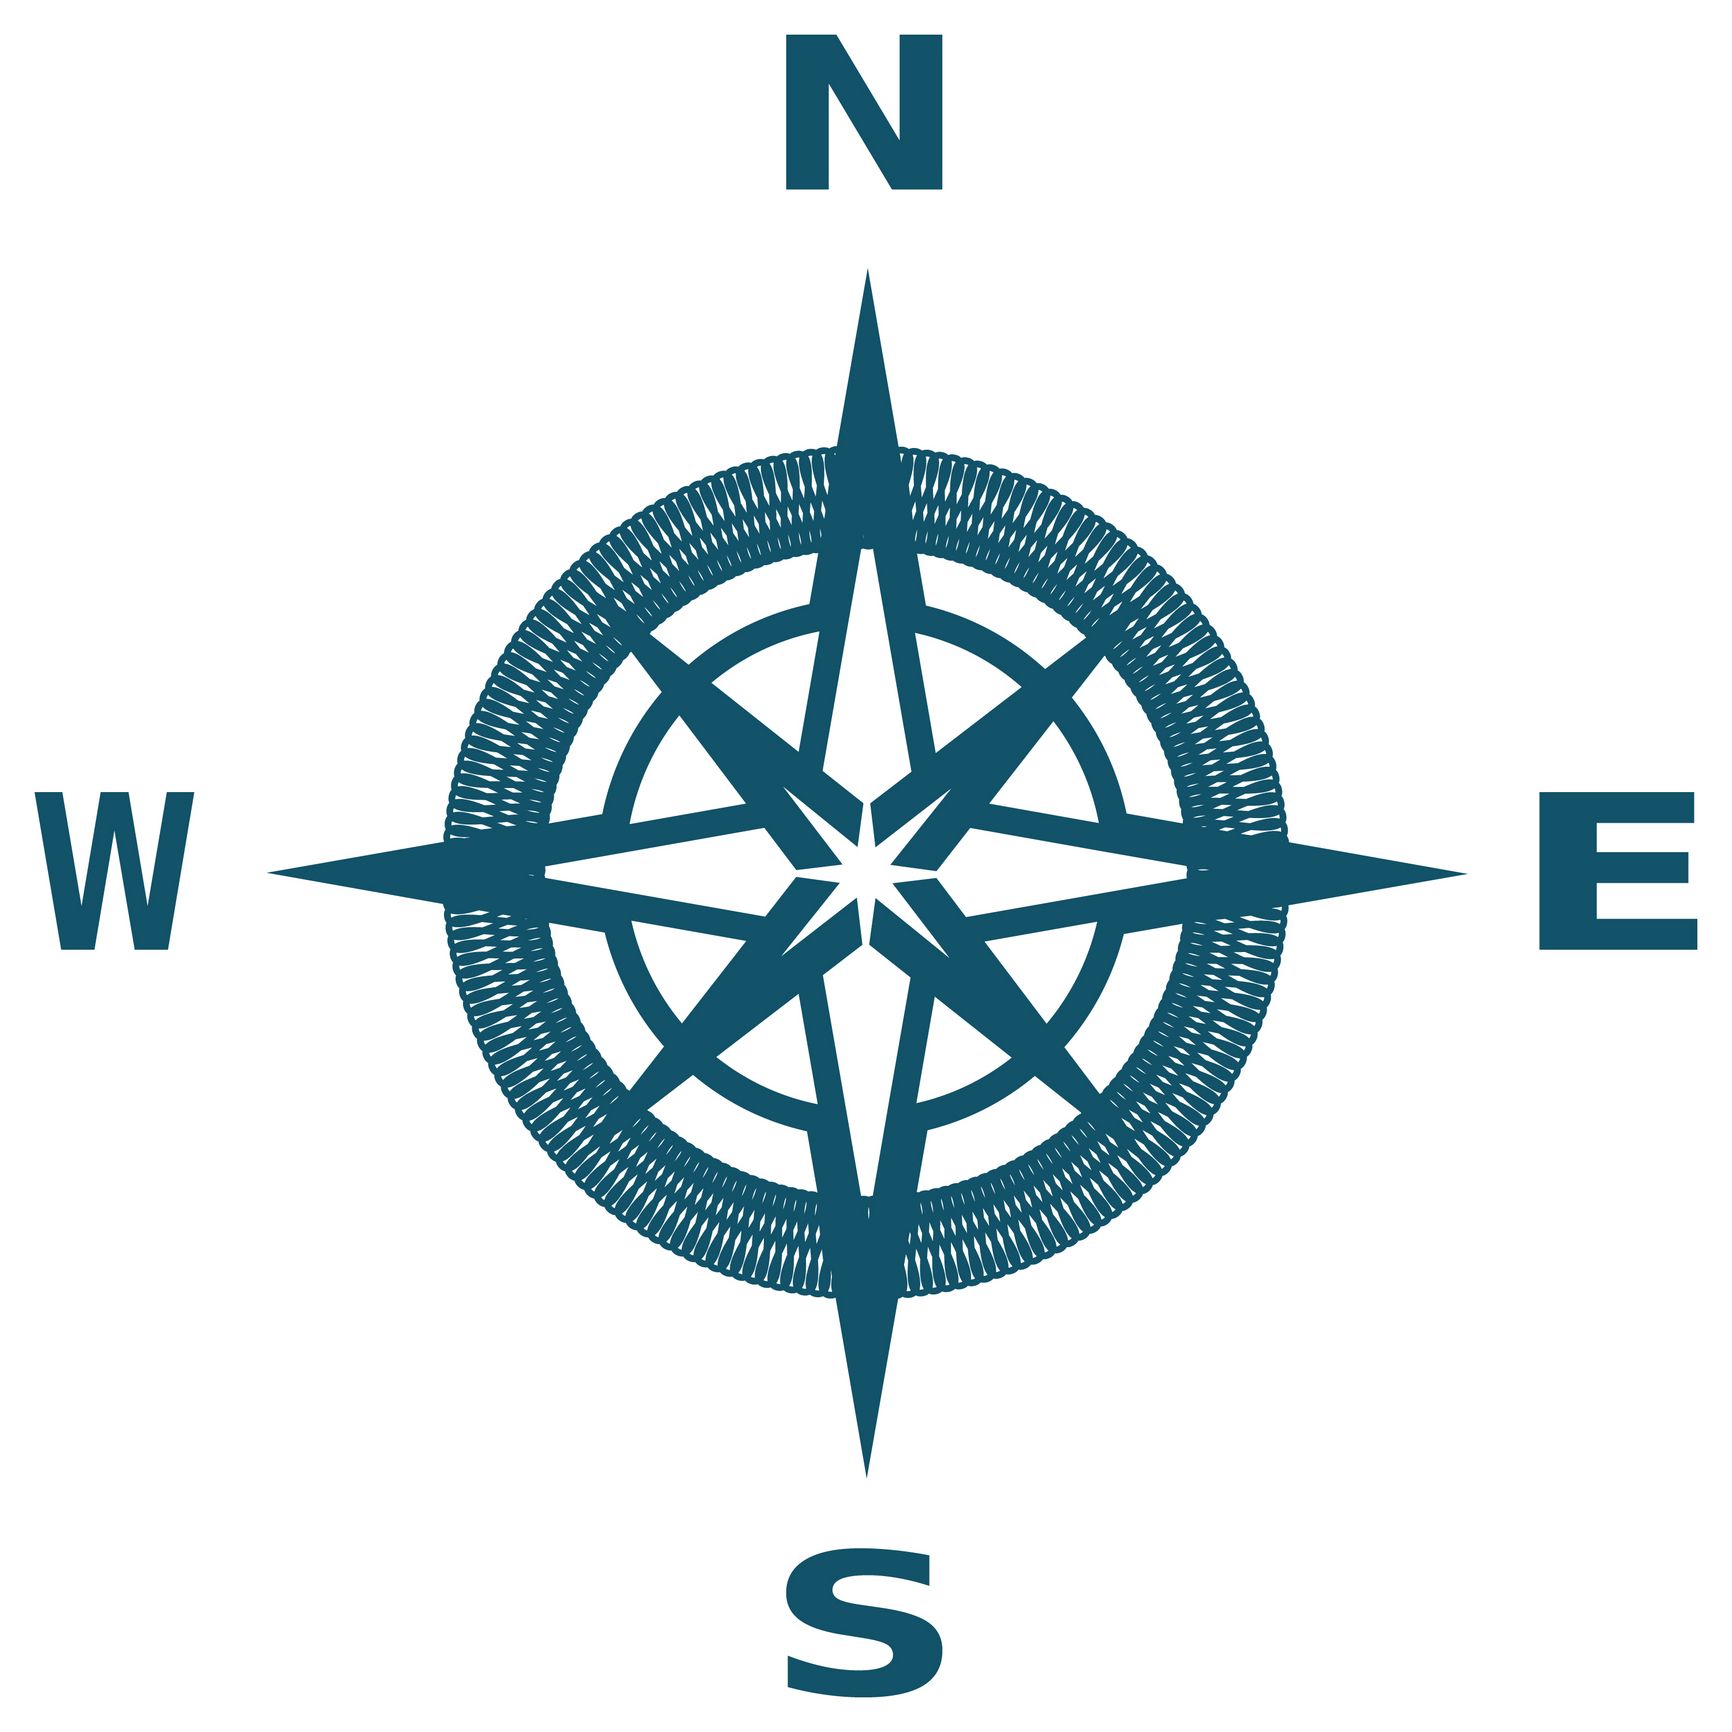 Compass Rose Png - Free Icons and PNG Backgrounds